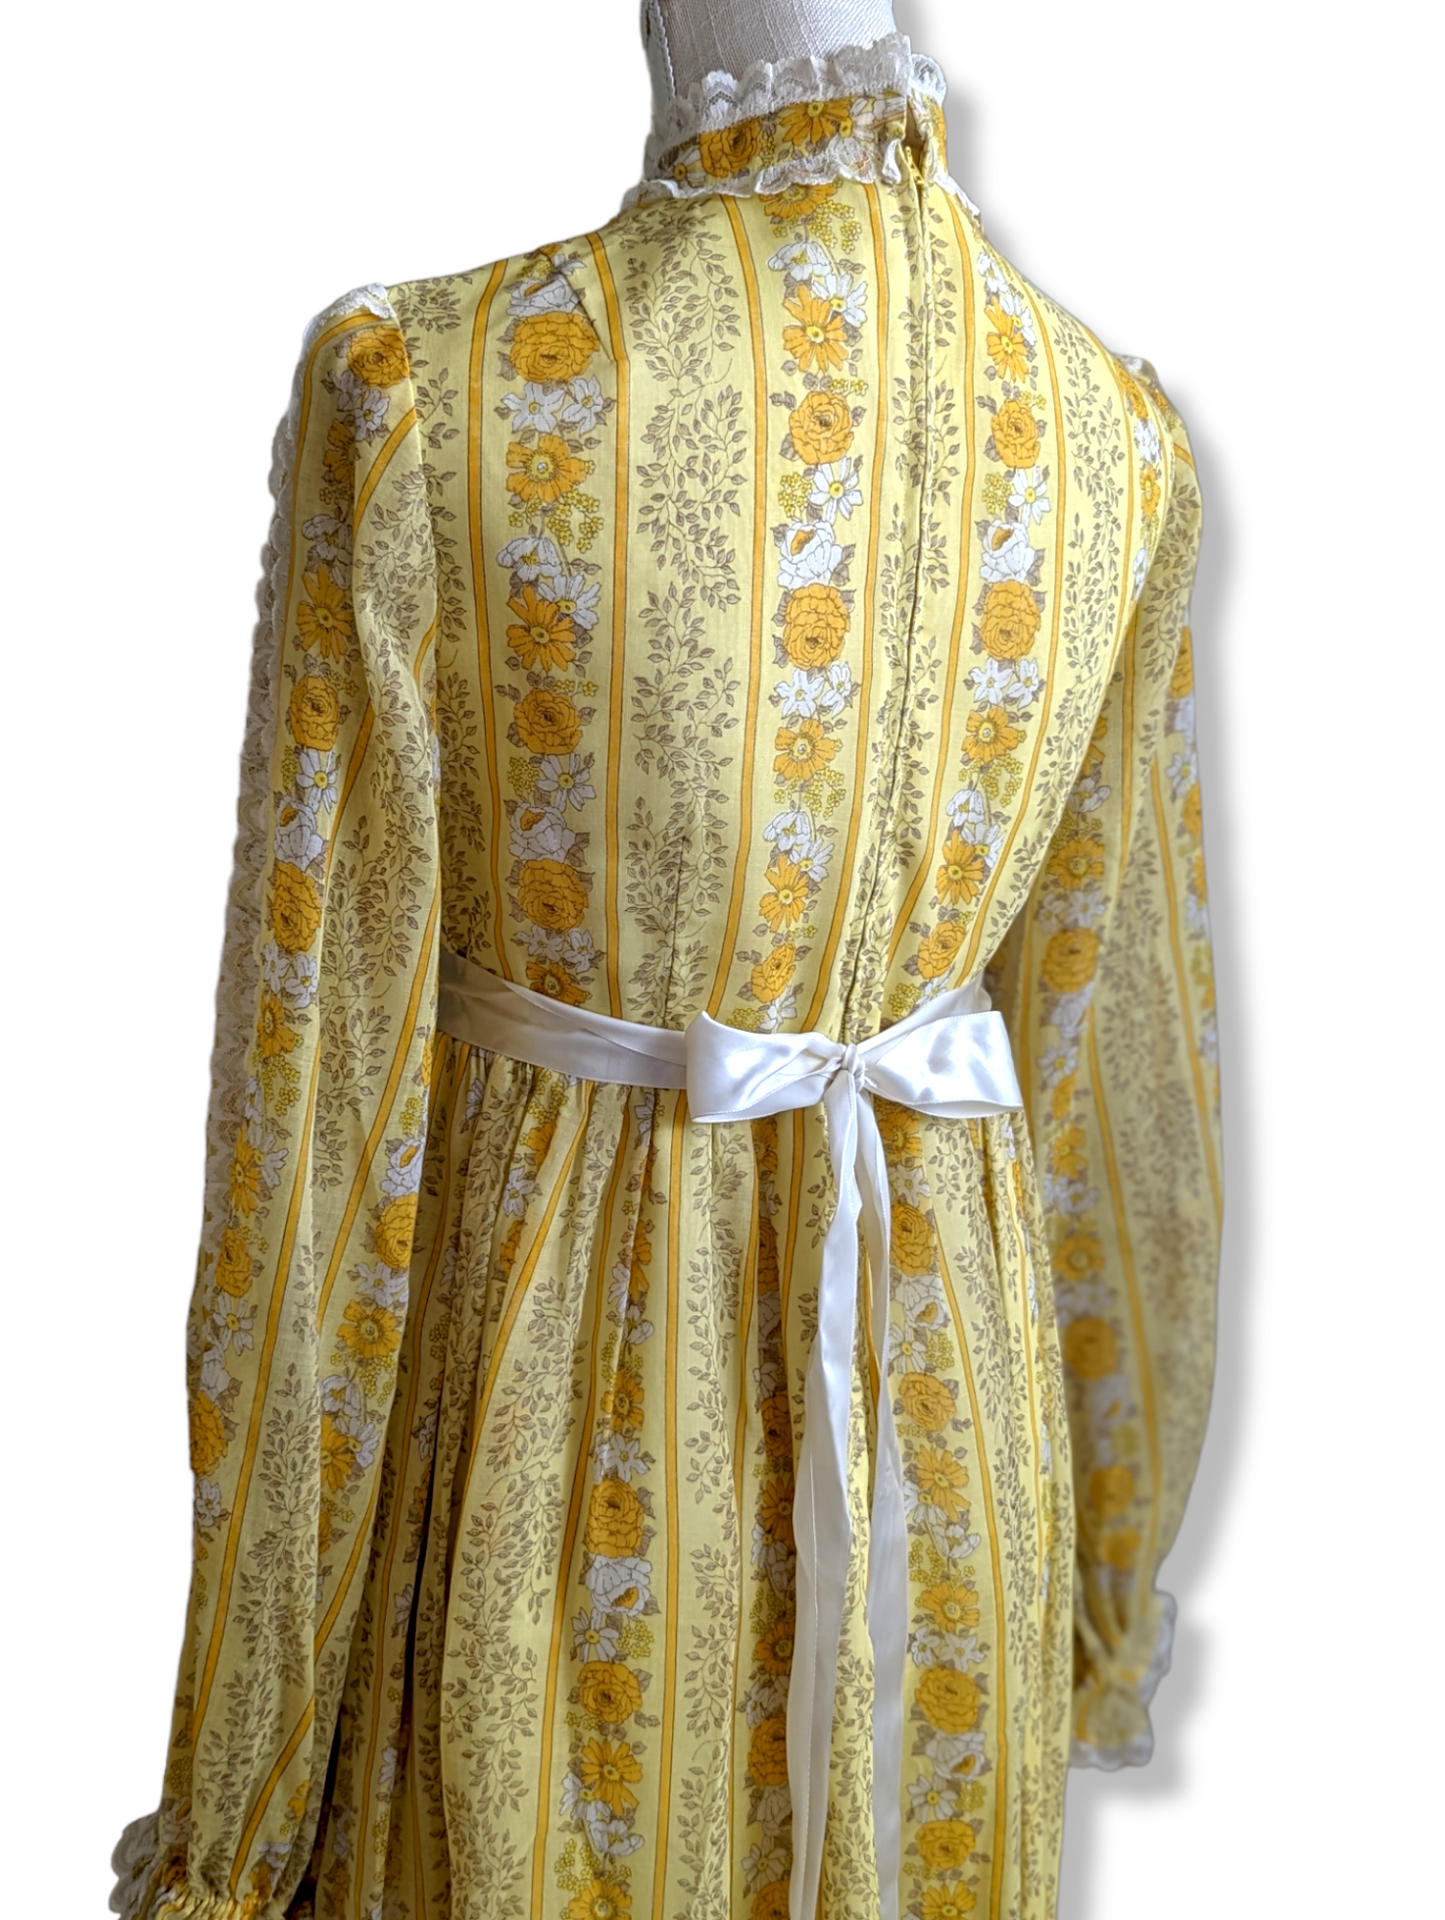 1970s Yellow Striped Peony and Daisy Floral Pioneer Prairie Dress with Long Sleeves, Empire Waist, High Collar, Lace Trim and Satin Ribbon